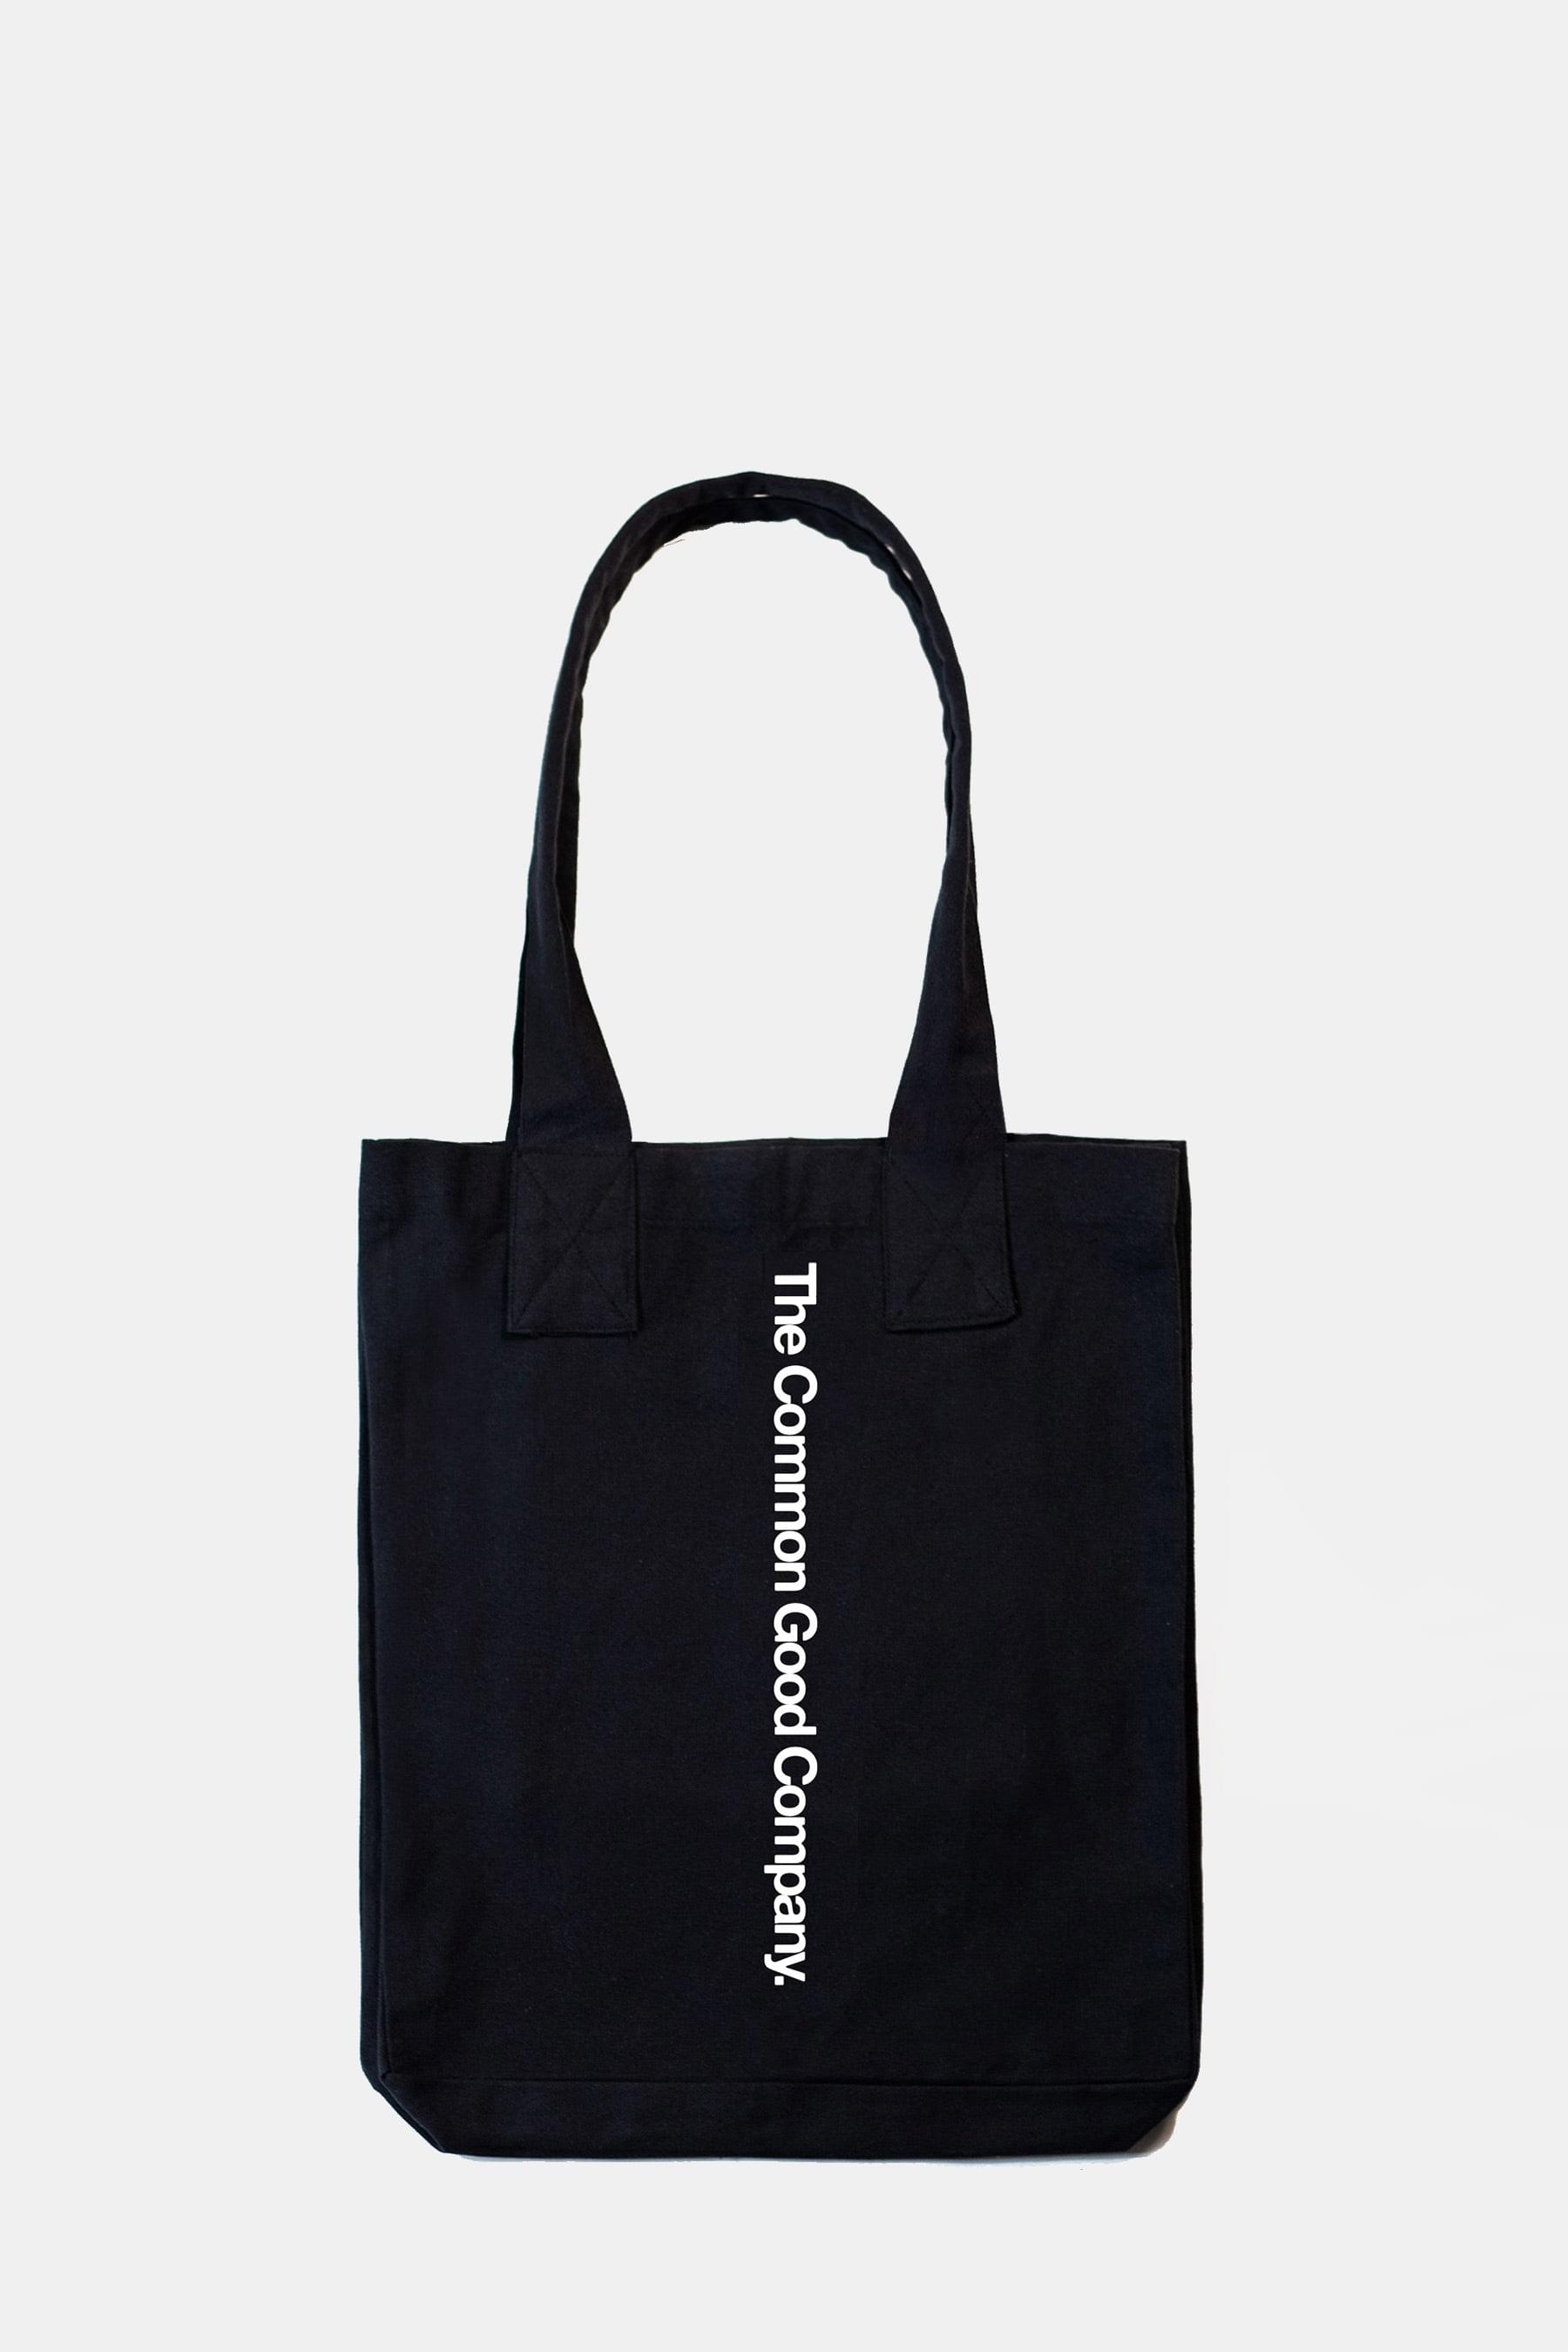 Charcoal 100% Recycled Cotton Everyday Tote - Longform Logo